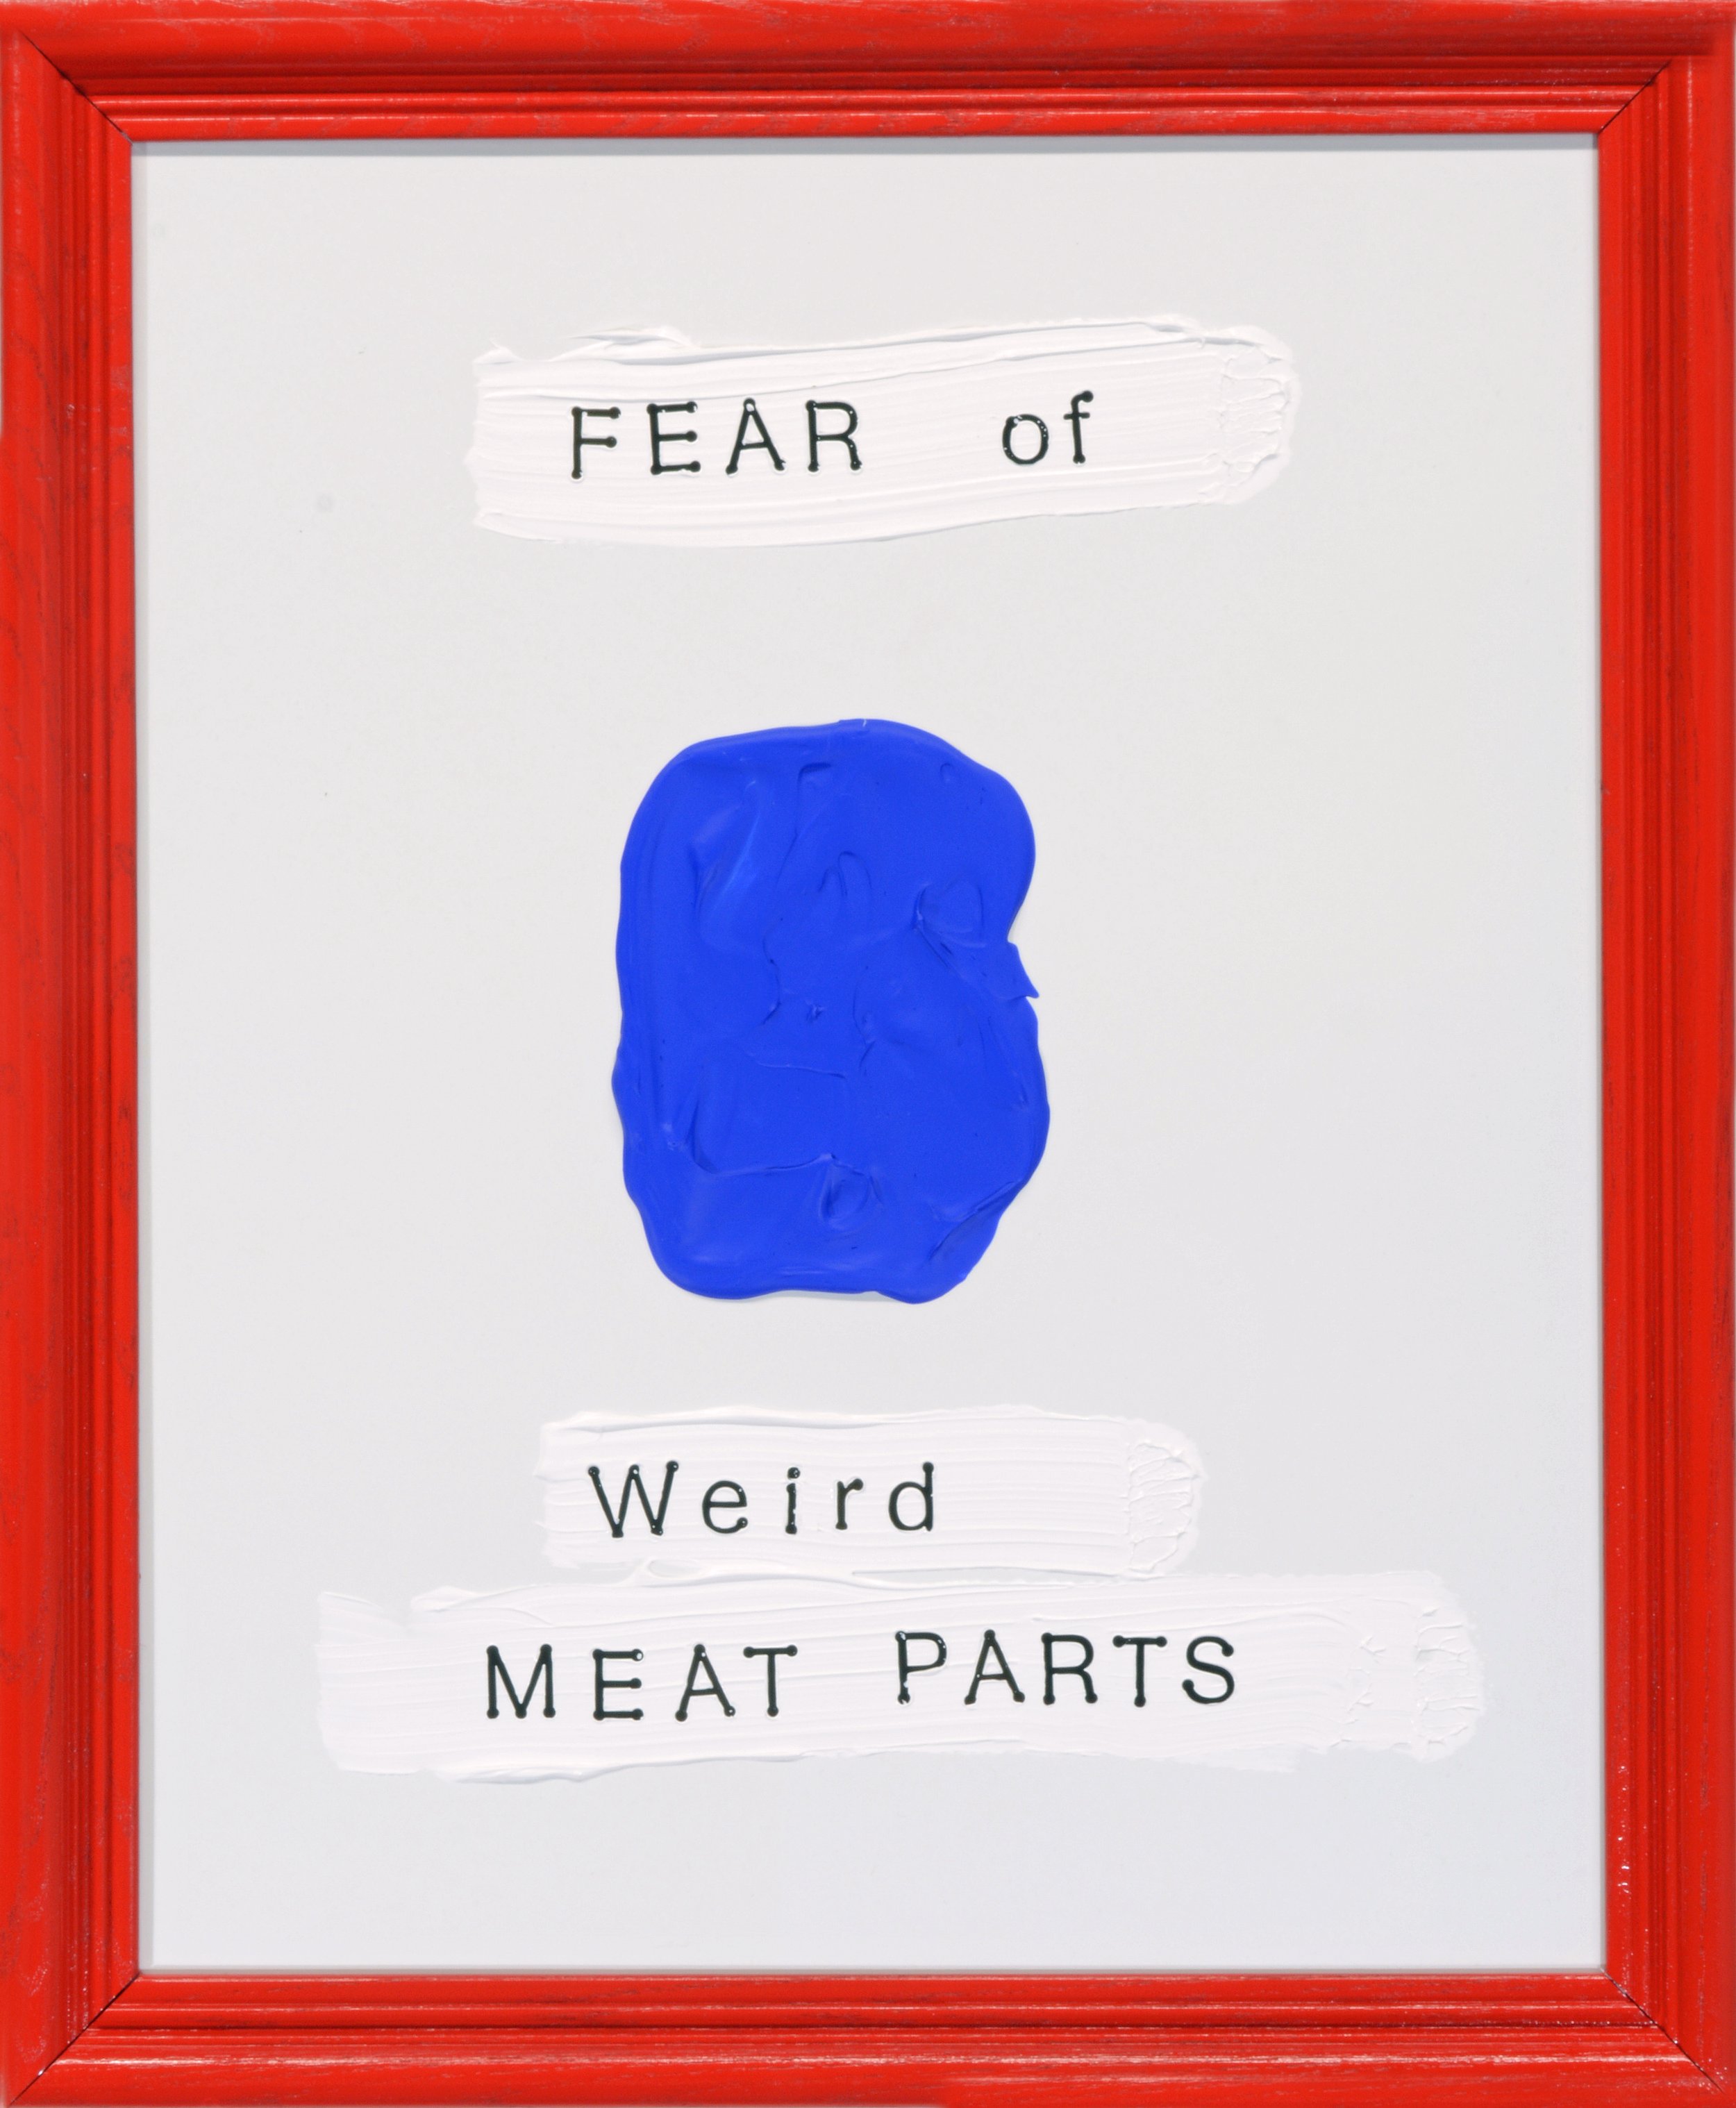 Fear of Weird Meat Parts